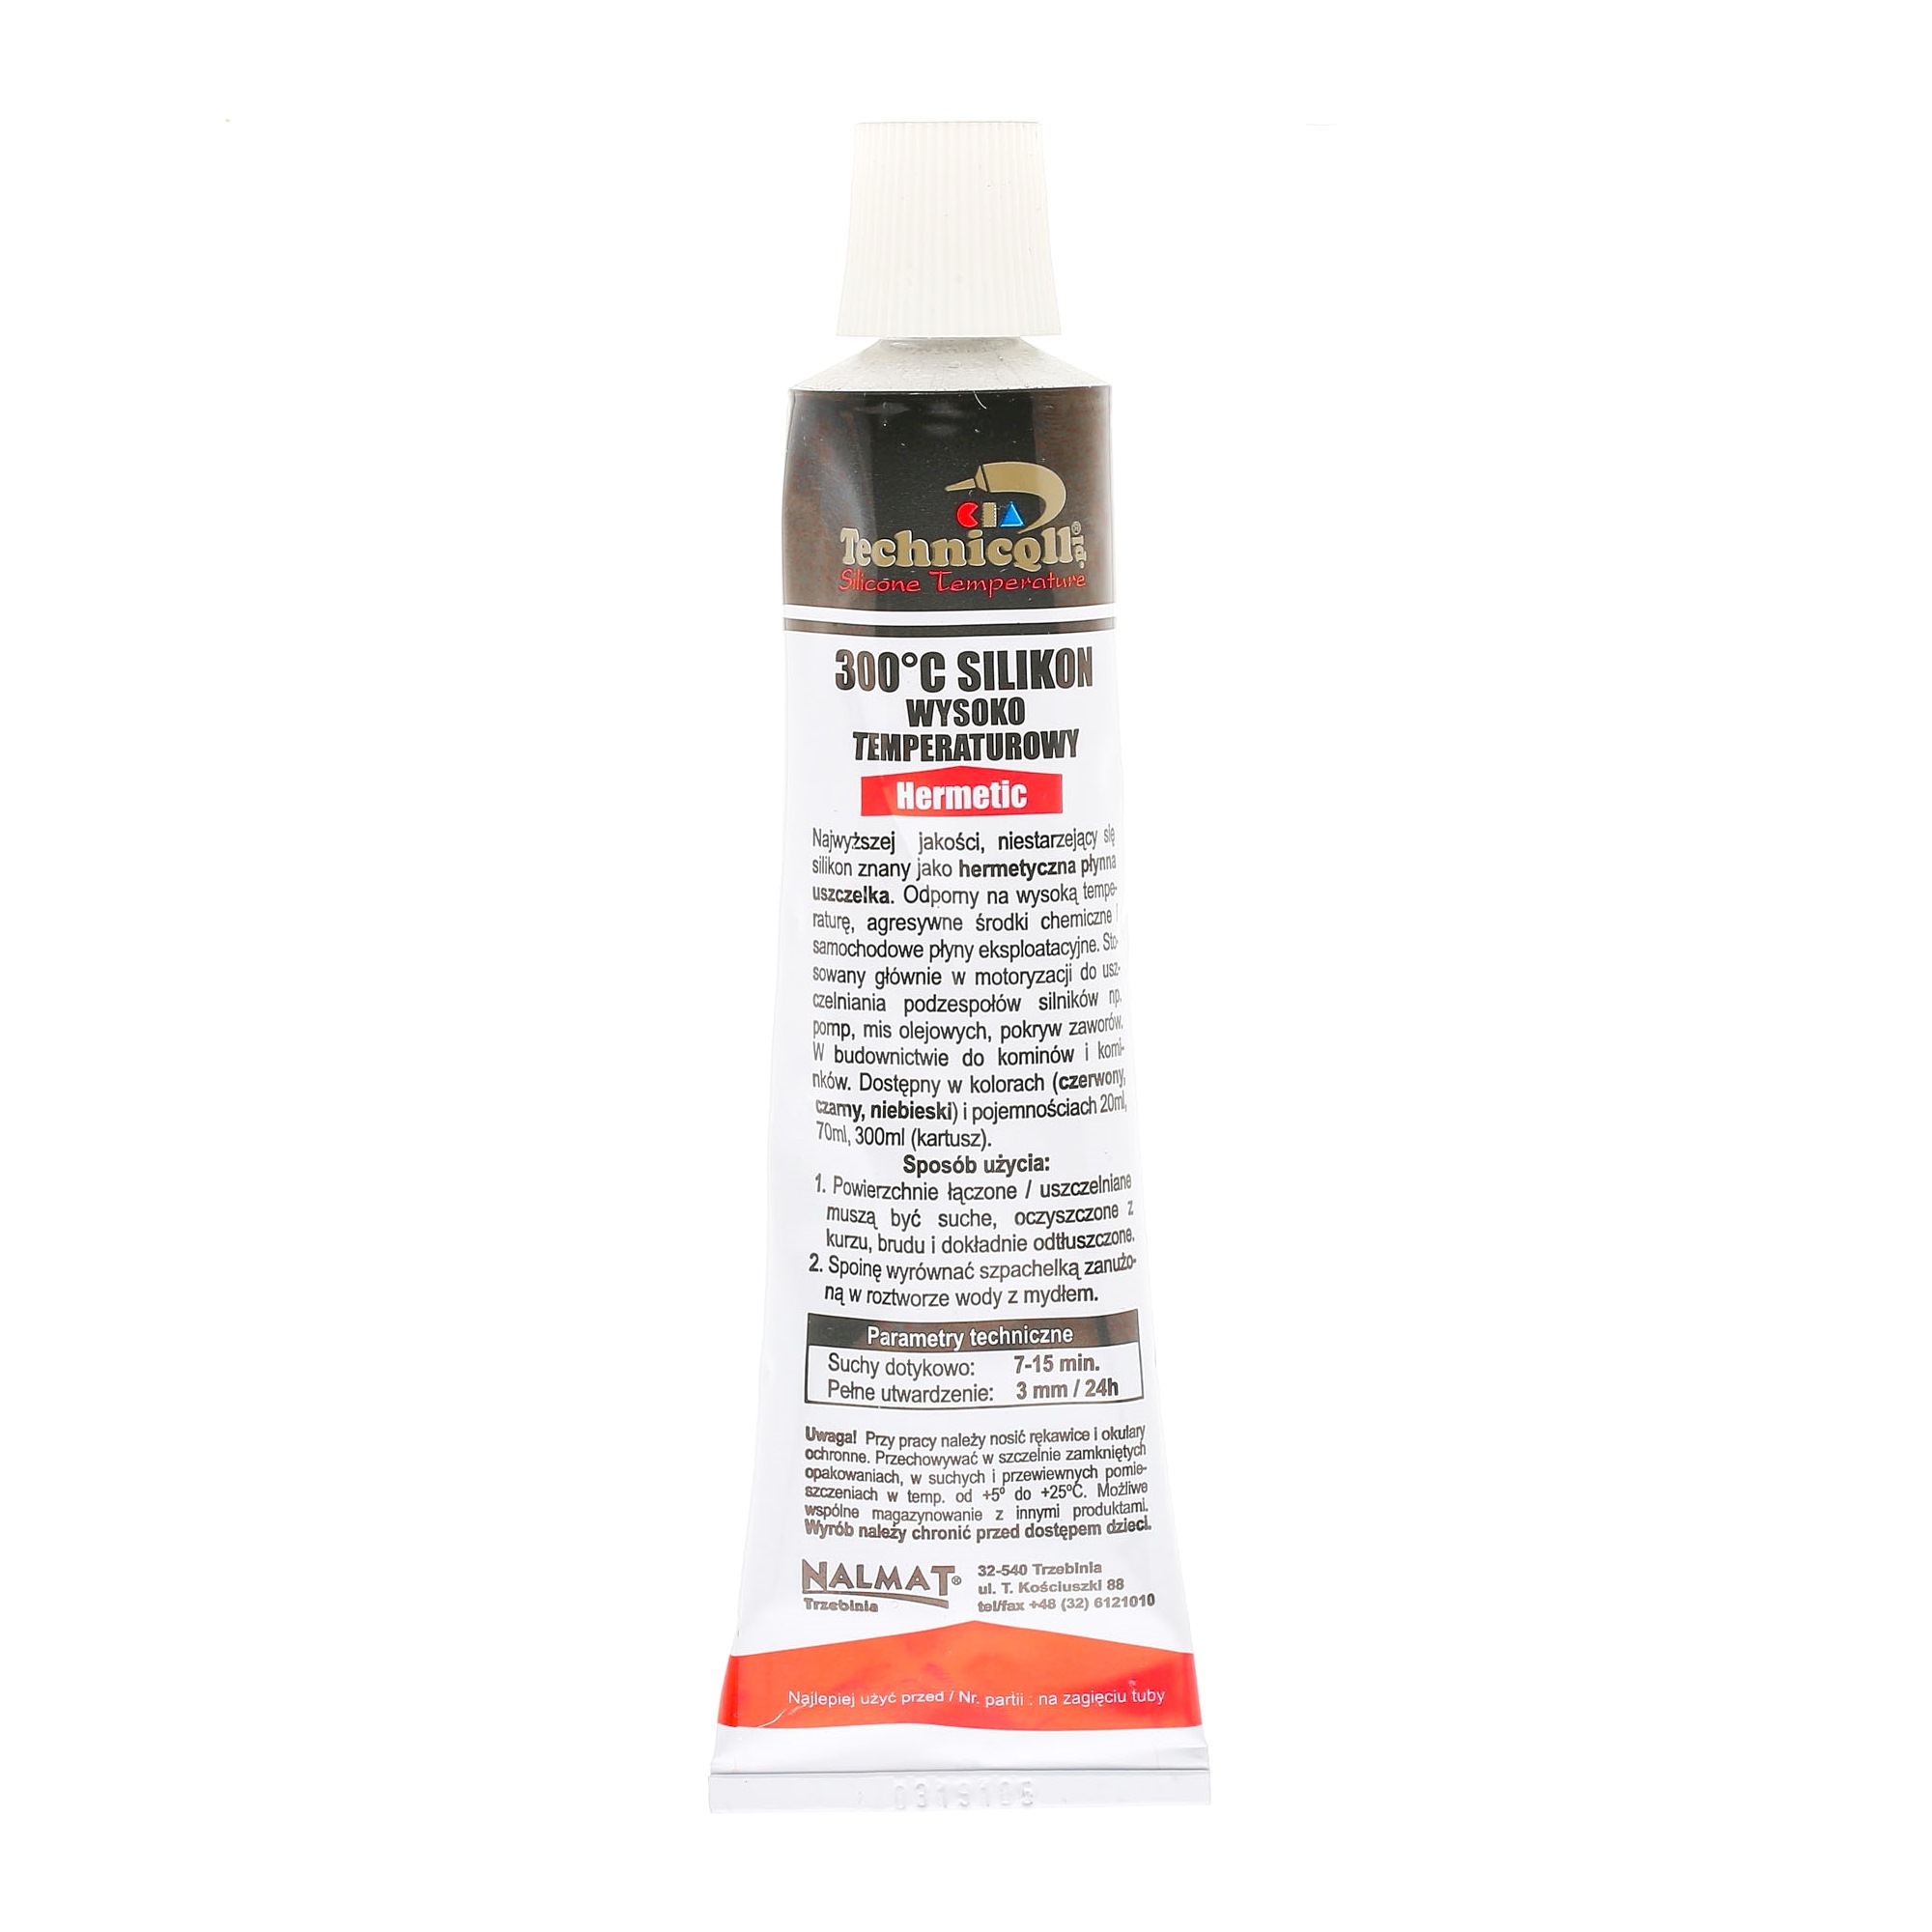 TECHNICQLL S-280 Sealing Substance Capacity: 70ml, Contains silicate, Heat-resistant, red